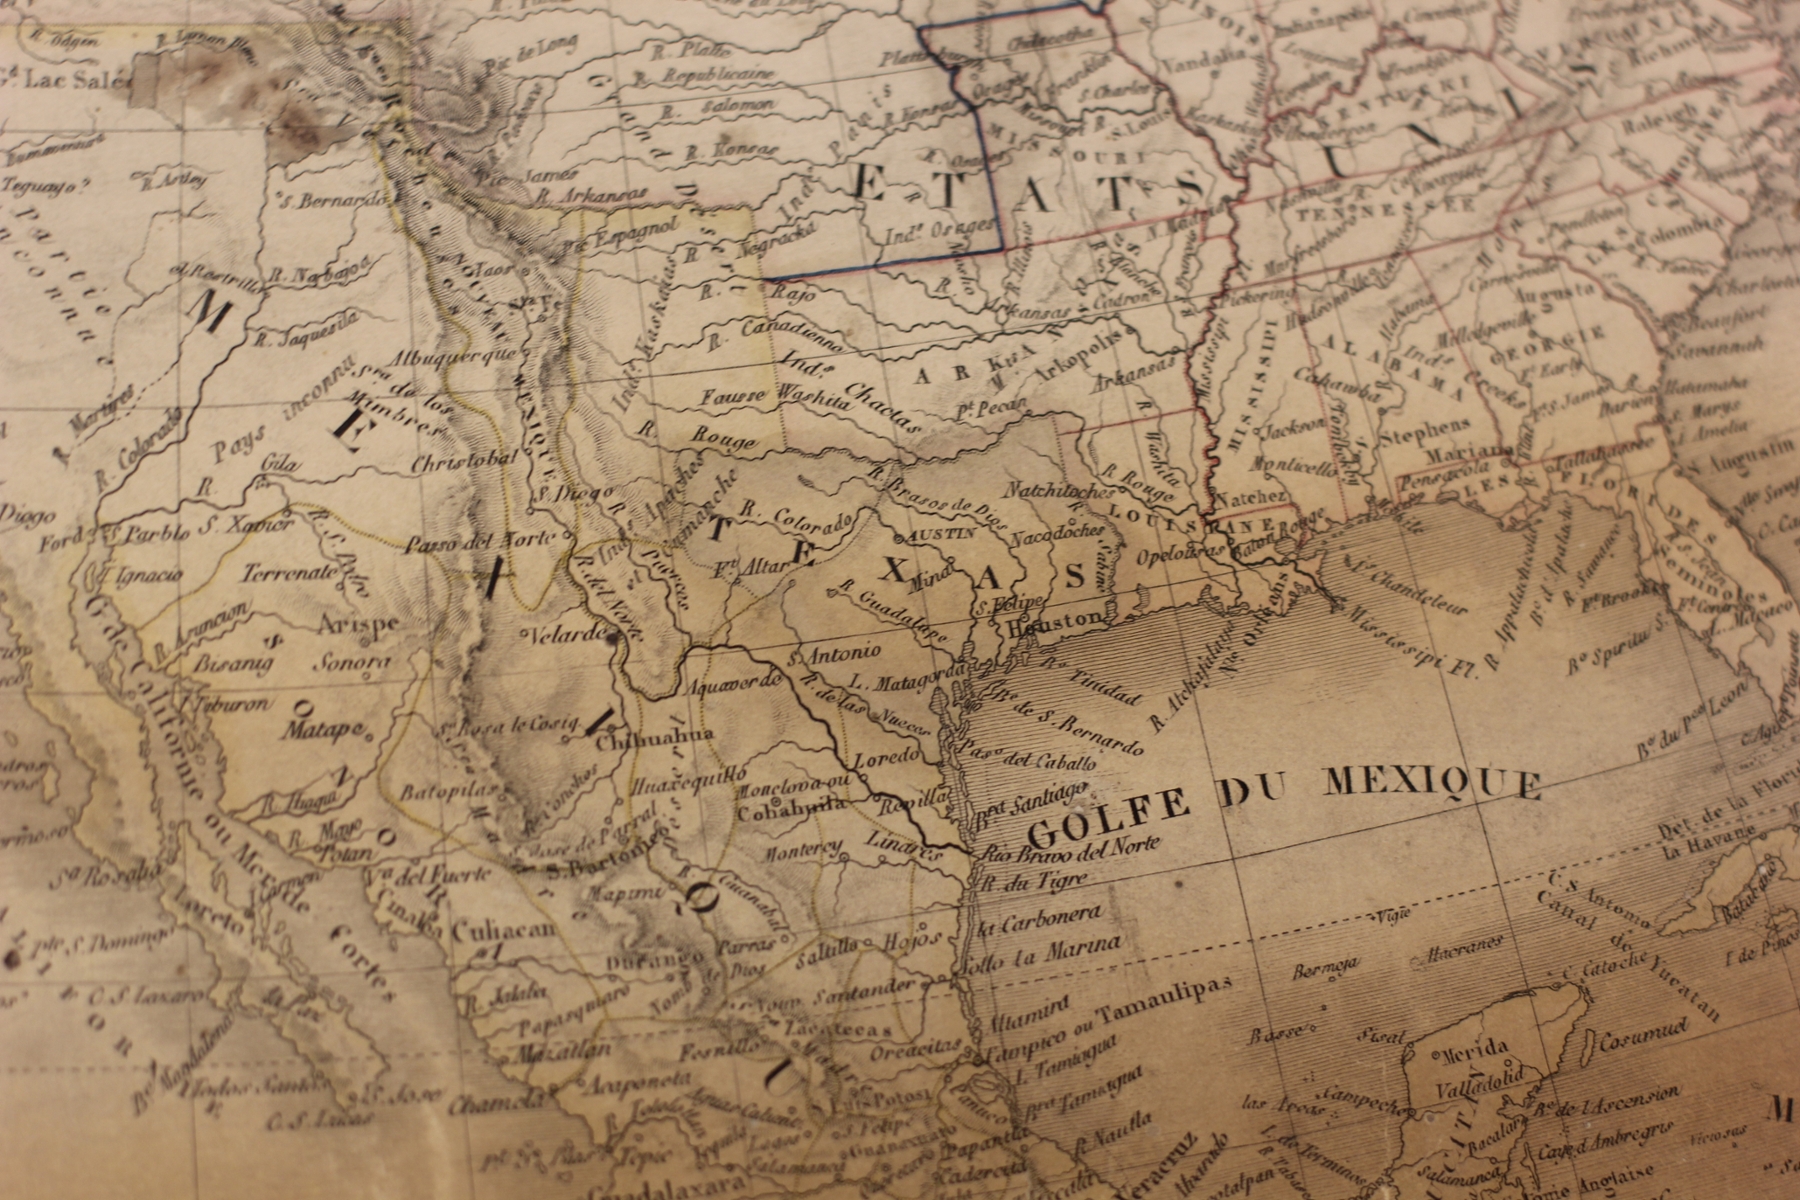 The image of a map contained in the cabinet, depicting the Golfe du Mexique (Gulf of Mexico).